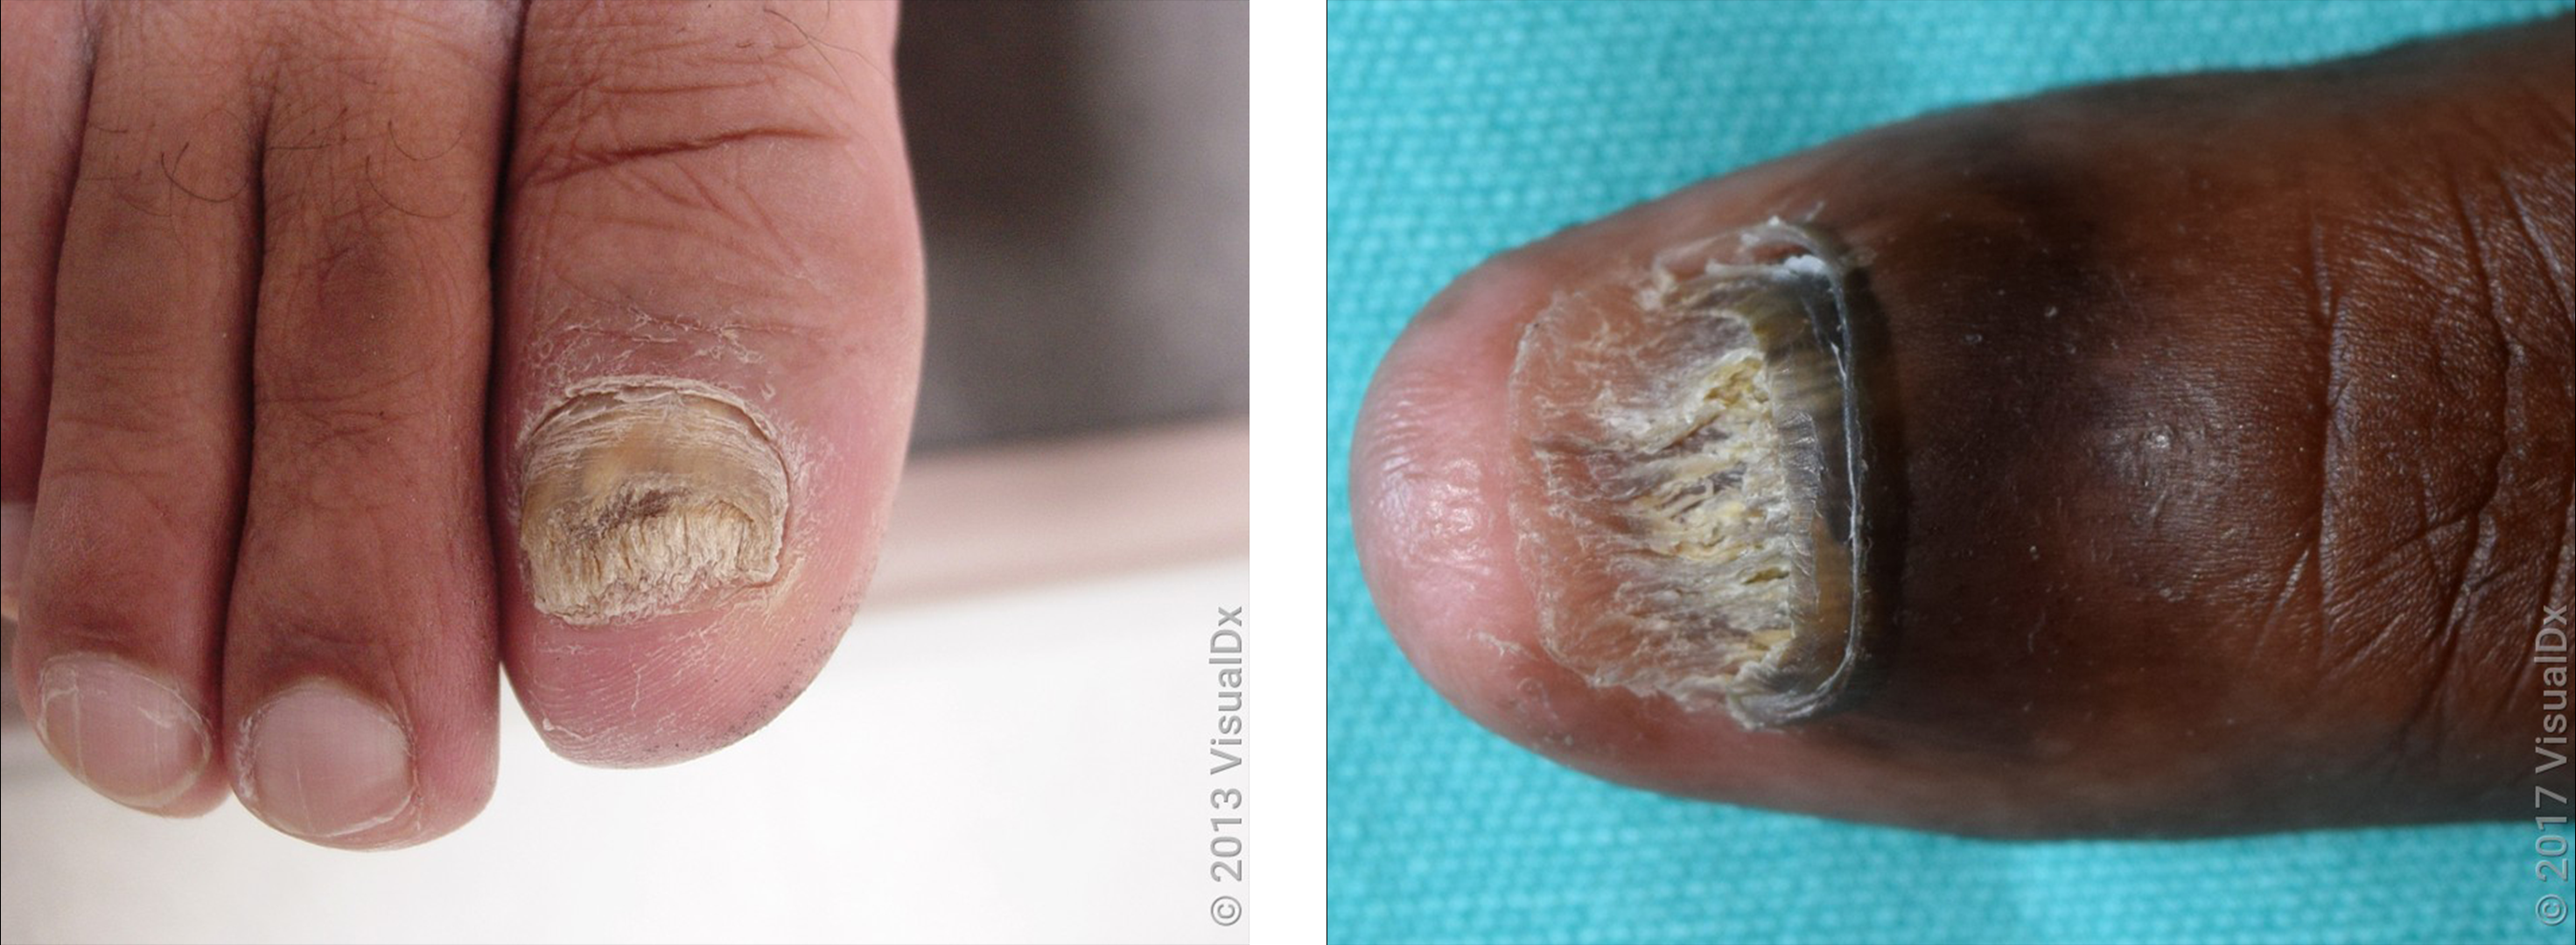 How To Care For Nails Affected By Psoriatic Arthritis